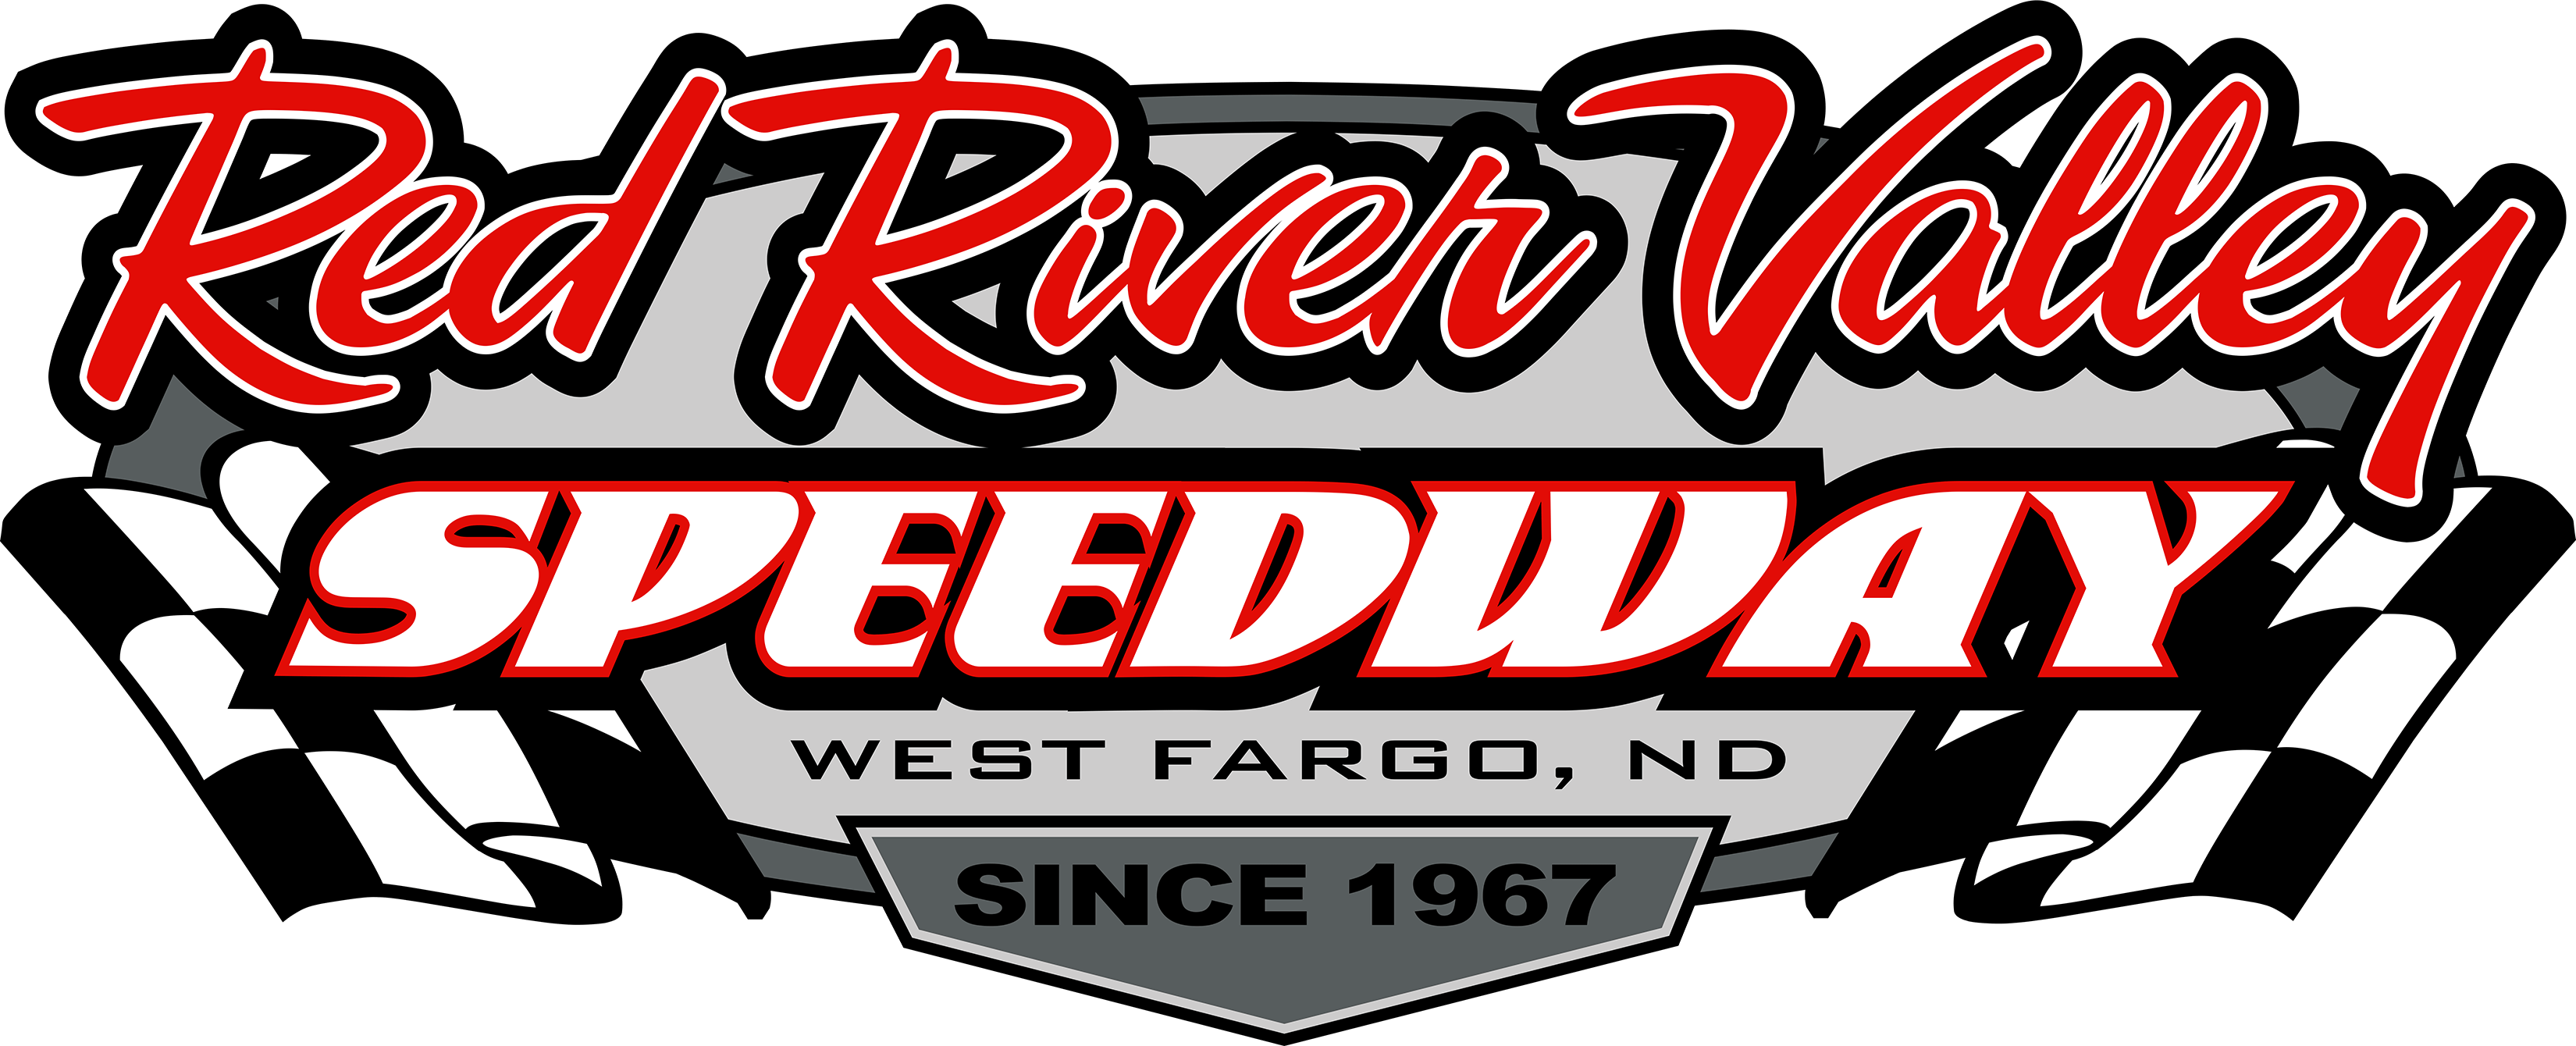 Speedway Logo - Red River Valley Speedway - The FASTEST Track Is BACK